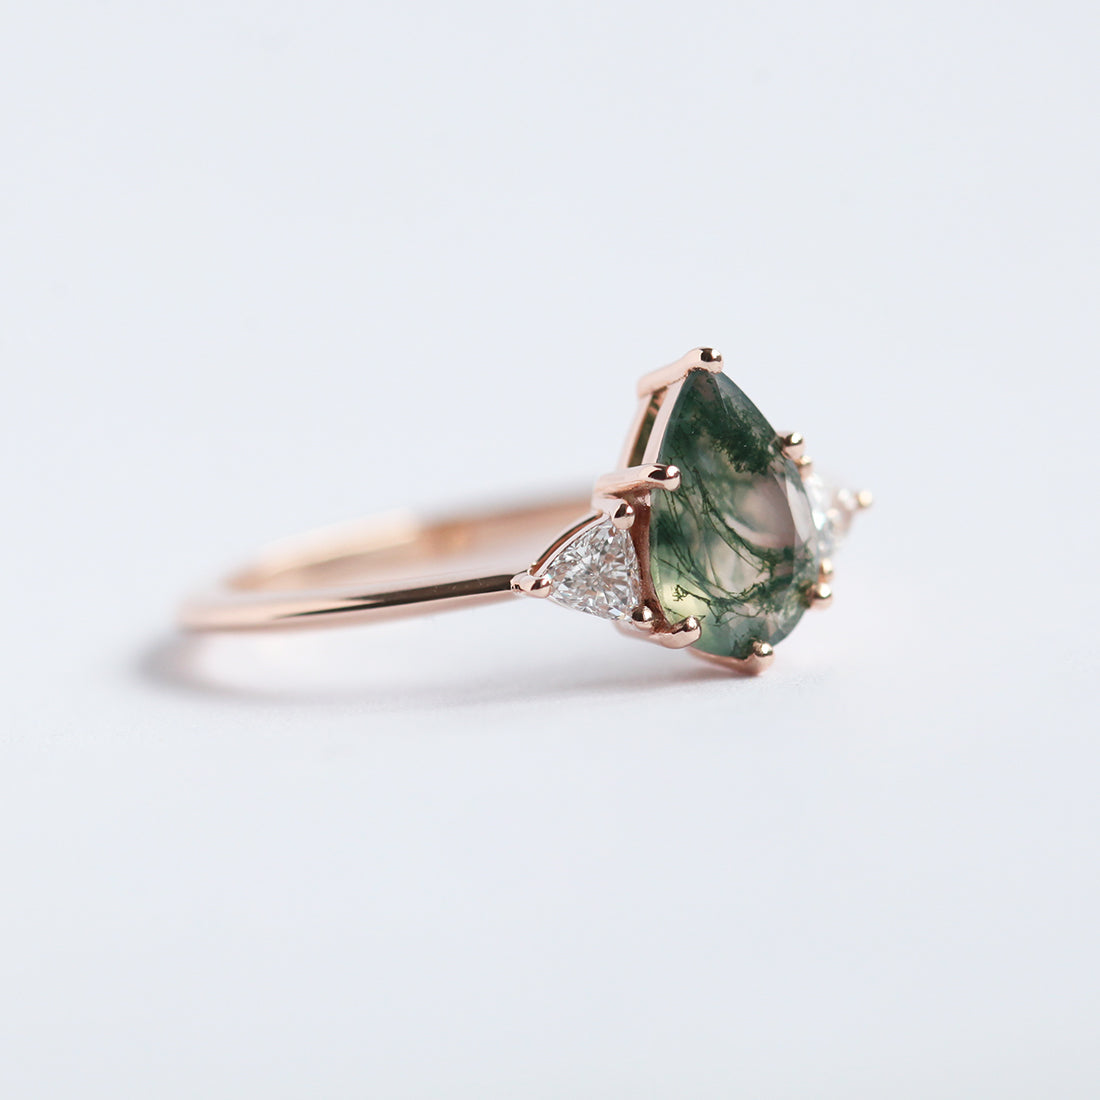 Green Pear Moss Agate Ring with Accent Round White Diamonds